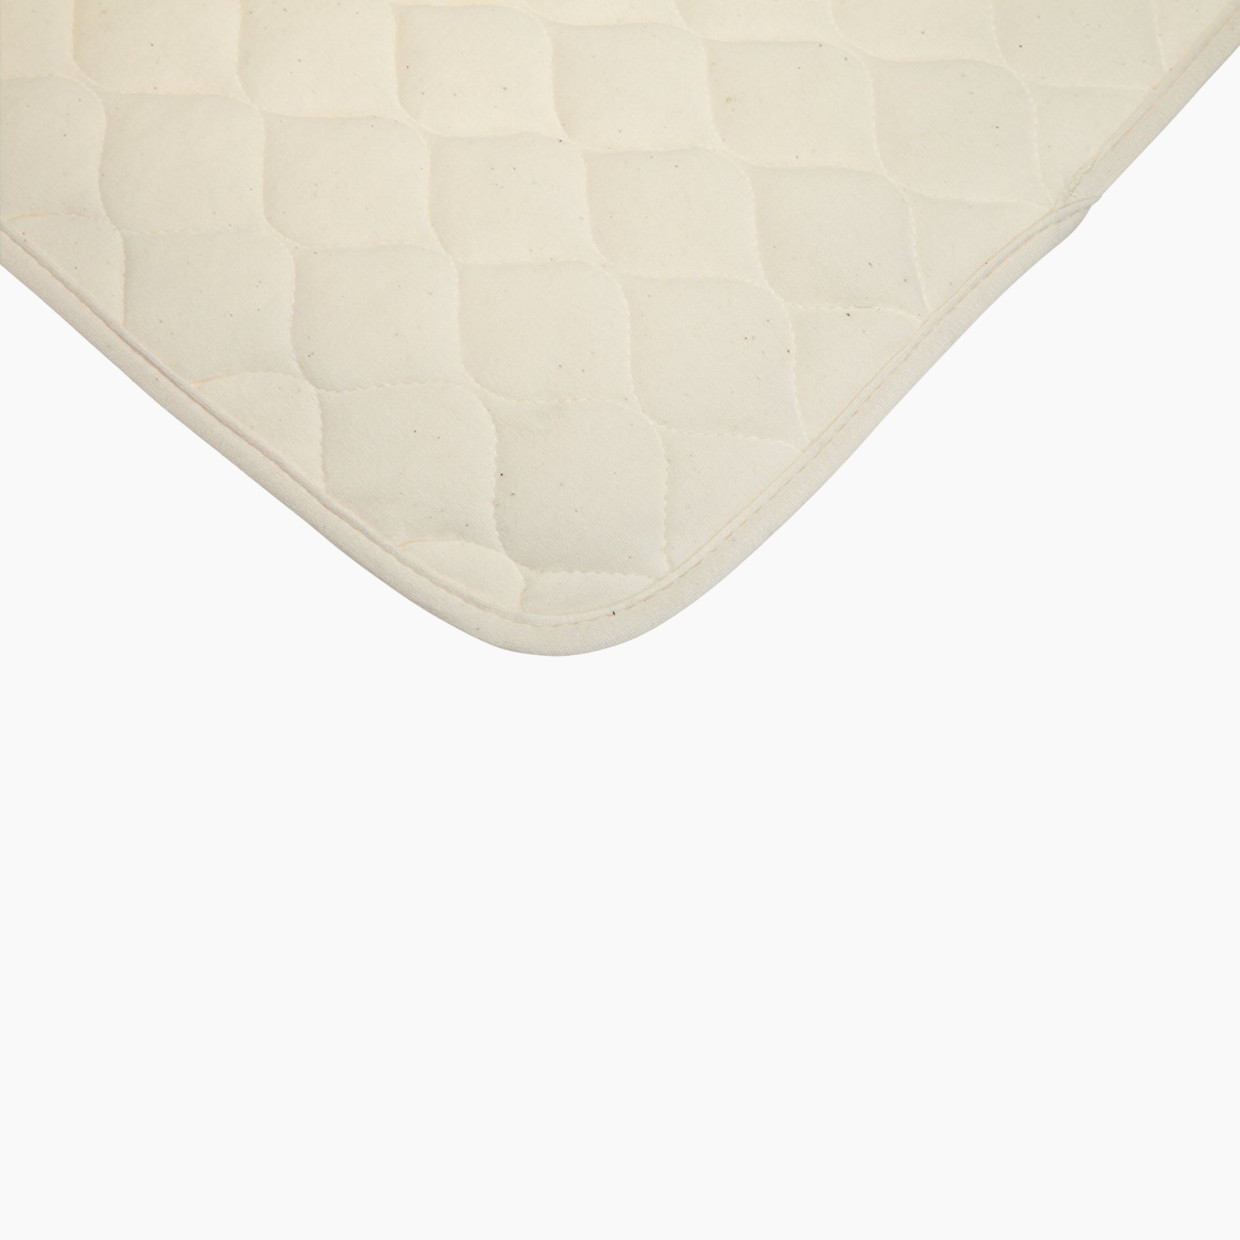 American Baby Company Waterproof Quilted Lap & Burp Pads (2 Pack).